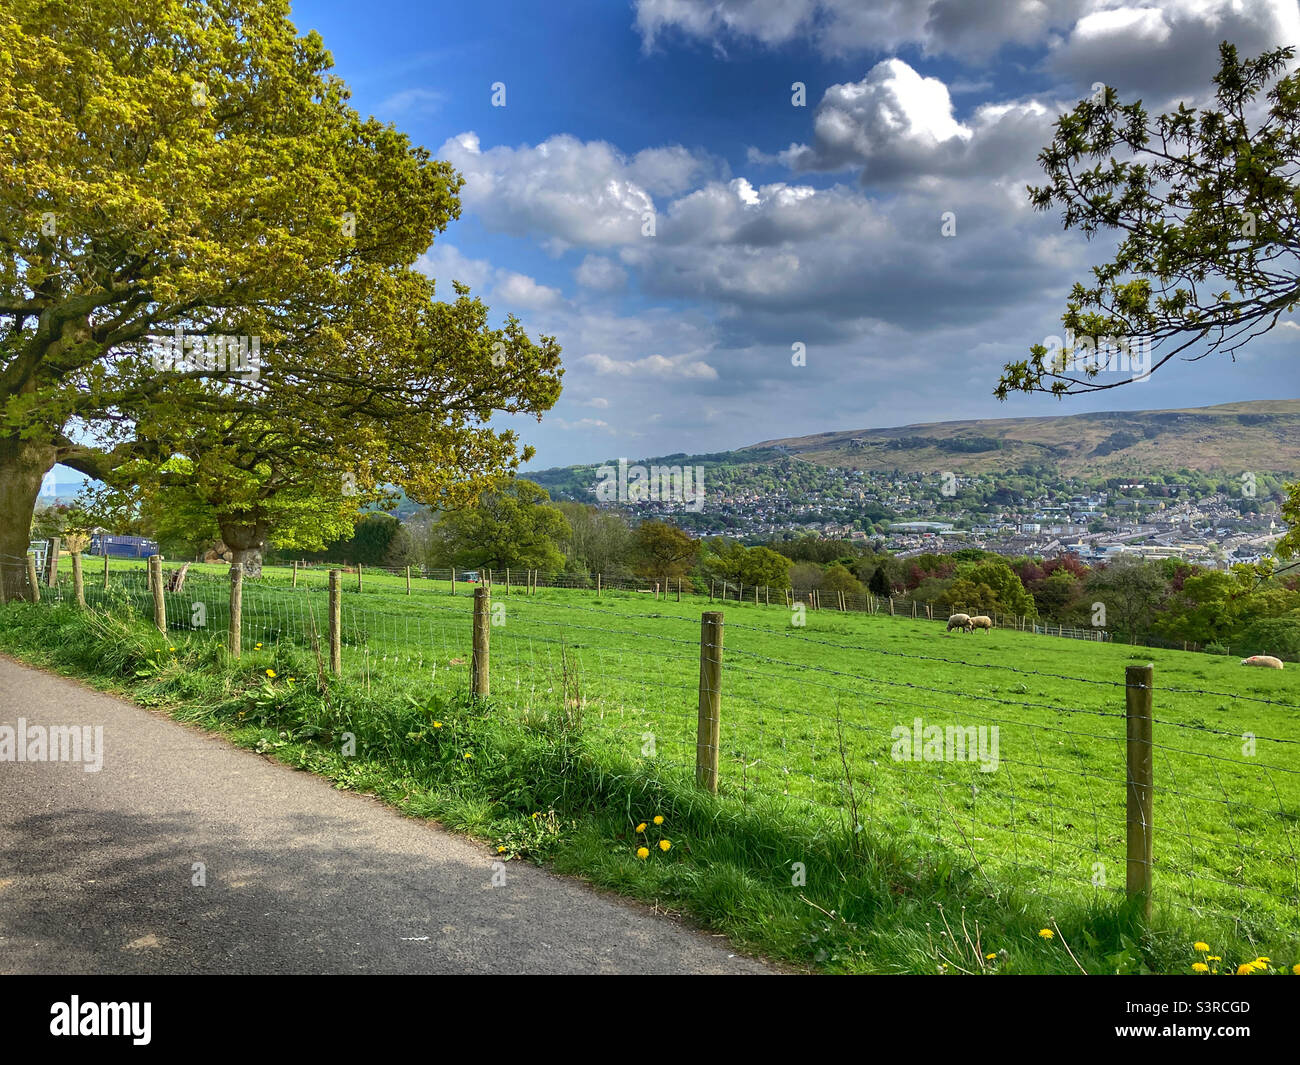 View of Ilkley West Yorkshire from a country lane Stock Photo